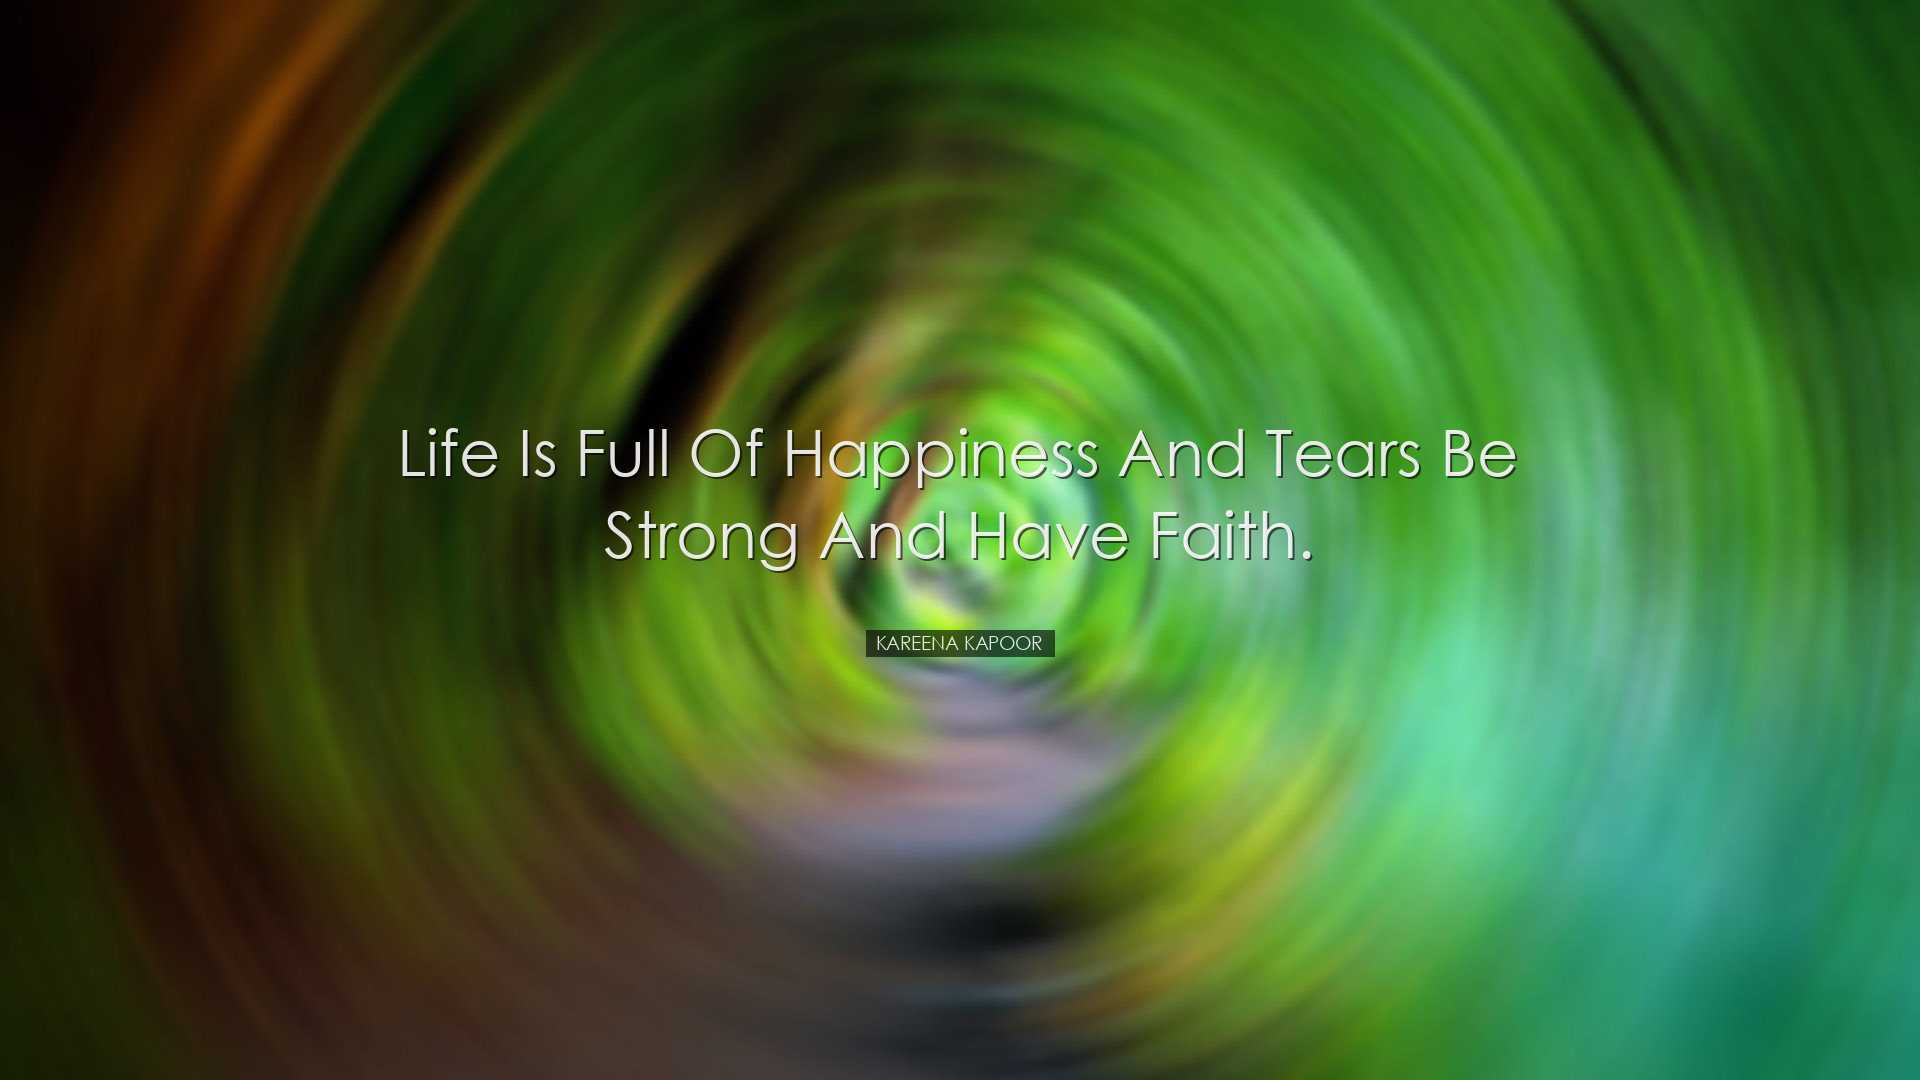 Life is full of happiness and tears be strong and have faith. - Ka